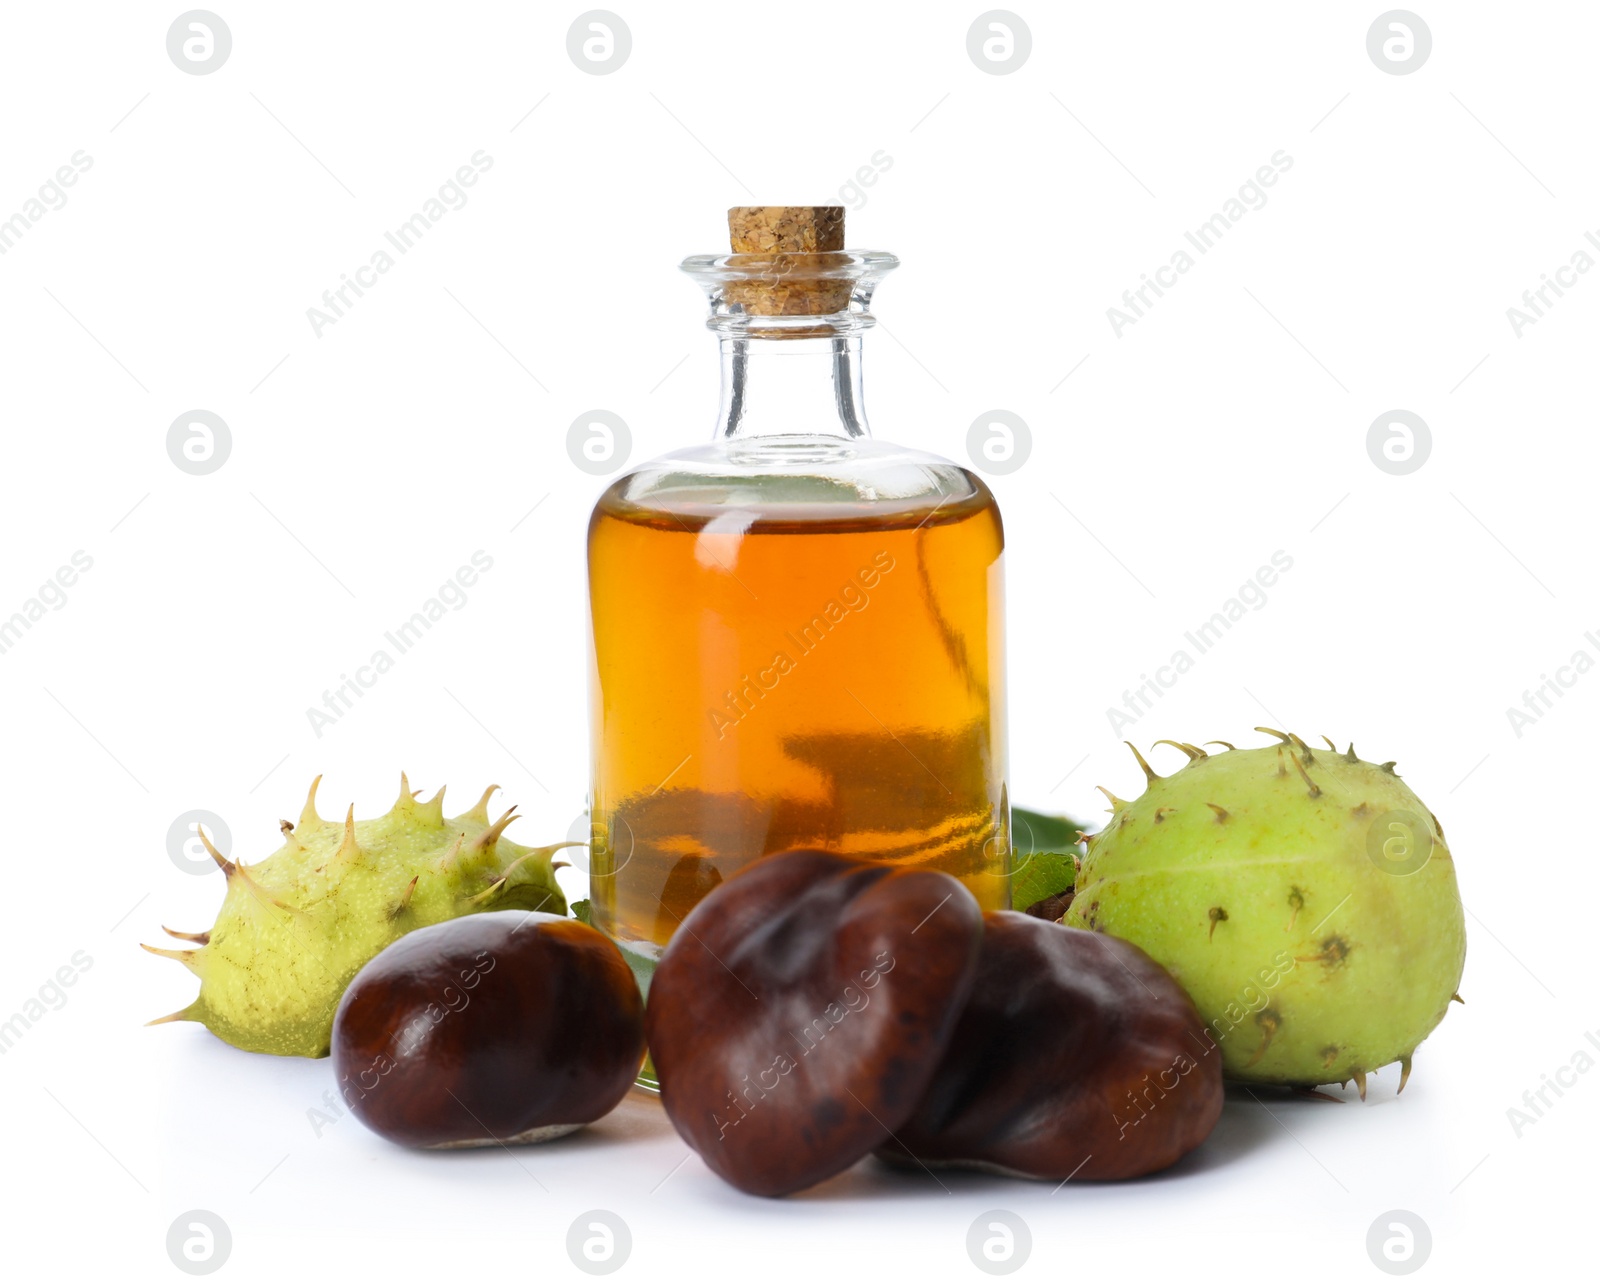 Photo of Horse chestnuts and bottle of tincture on white background